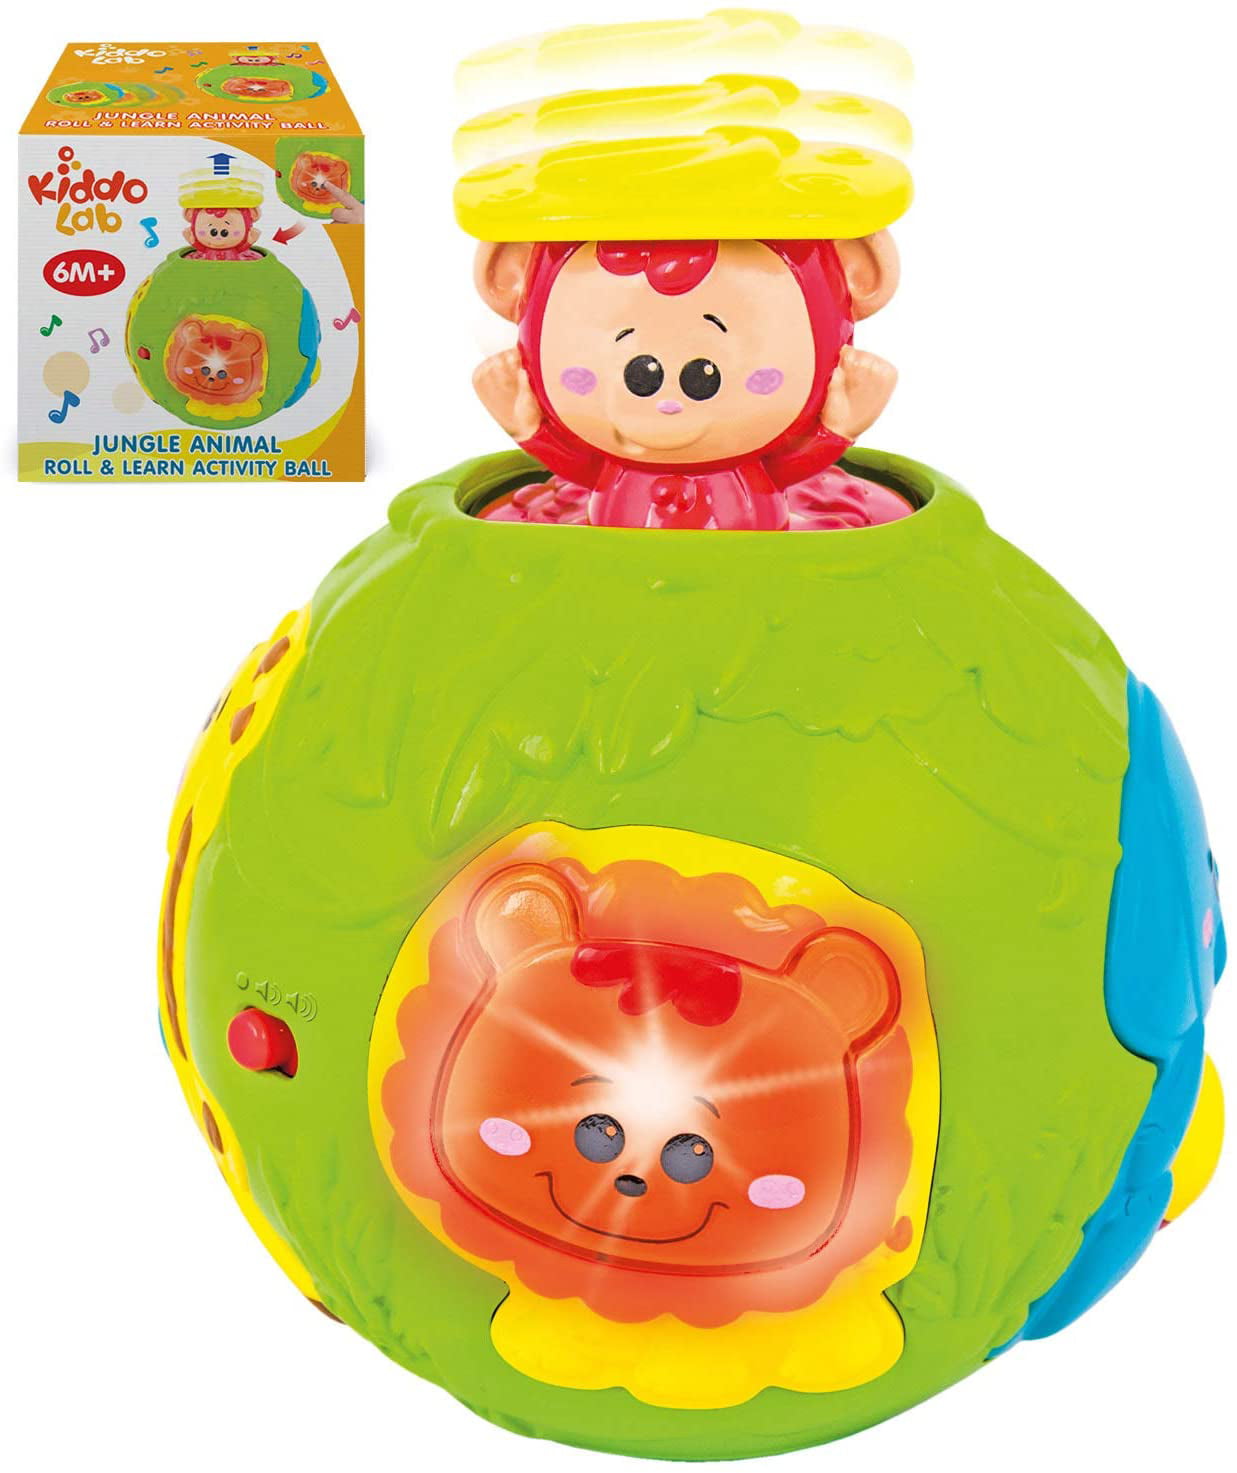 Kiddolab Jungle Animal Roll Learn Activity Ball Fun Baby Activity Center Lights Sounds Music Ages 6m Walmart Com